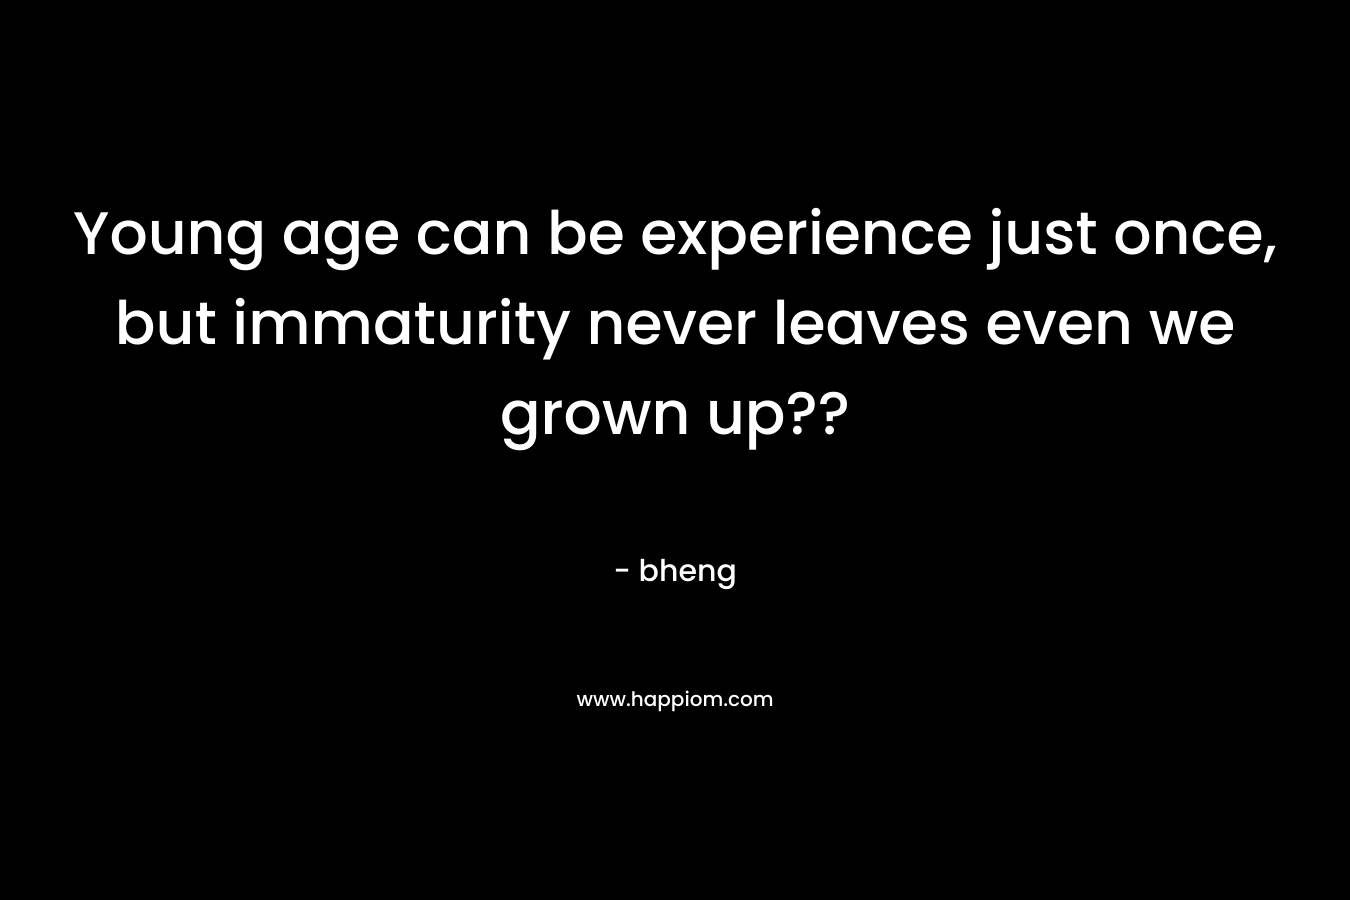 Young age can be experience just once, but immaturity never leaves even we grown up??